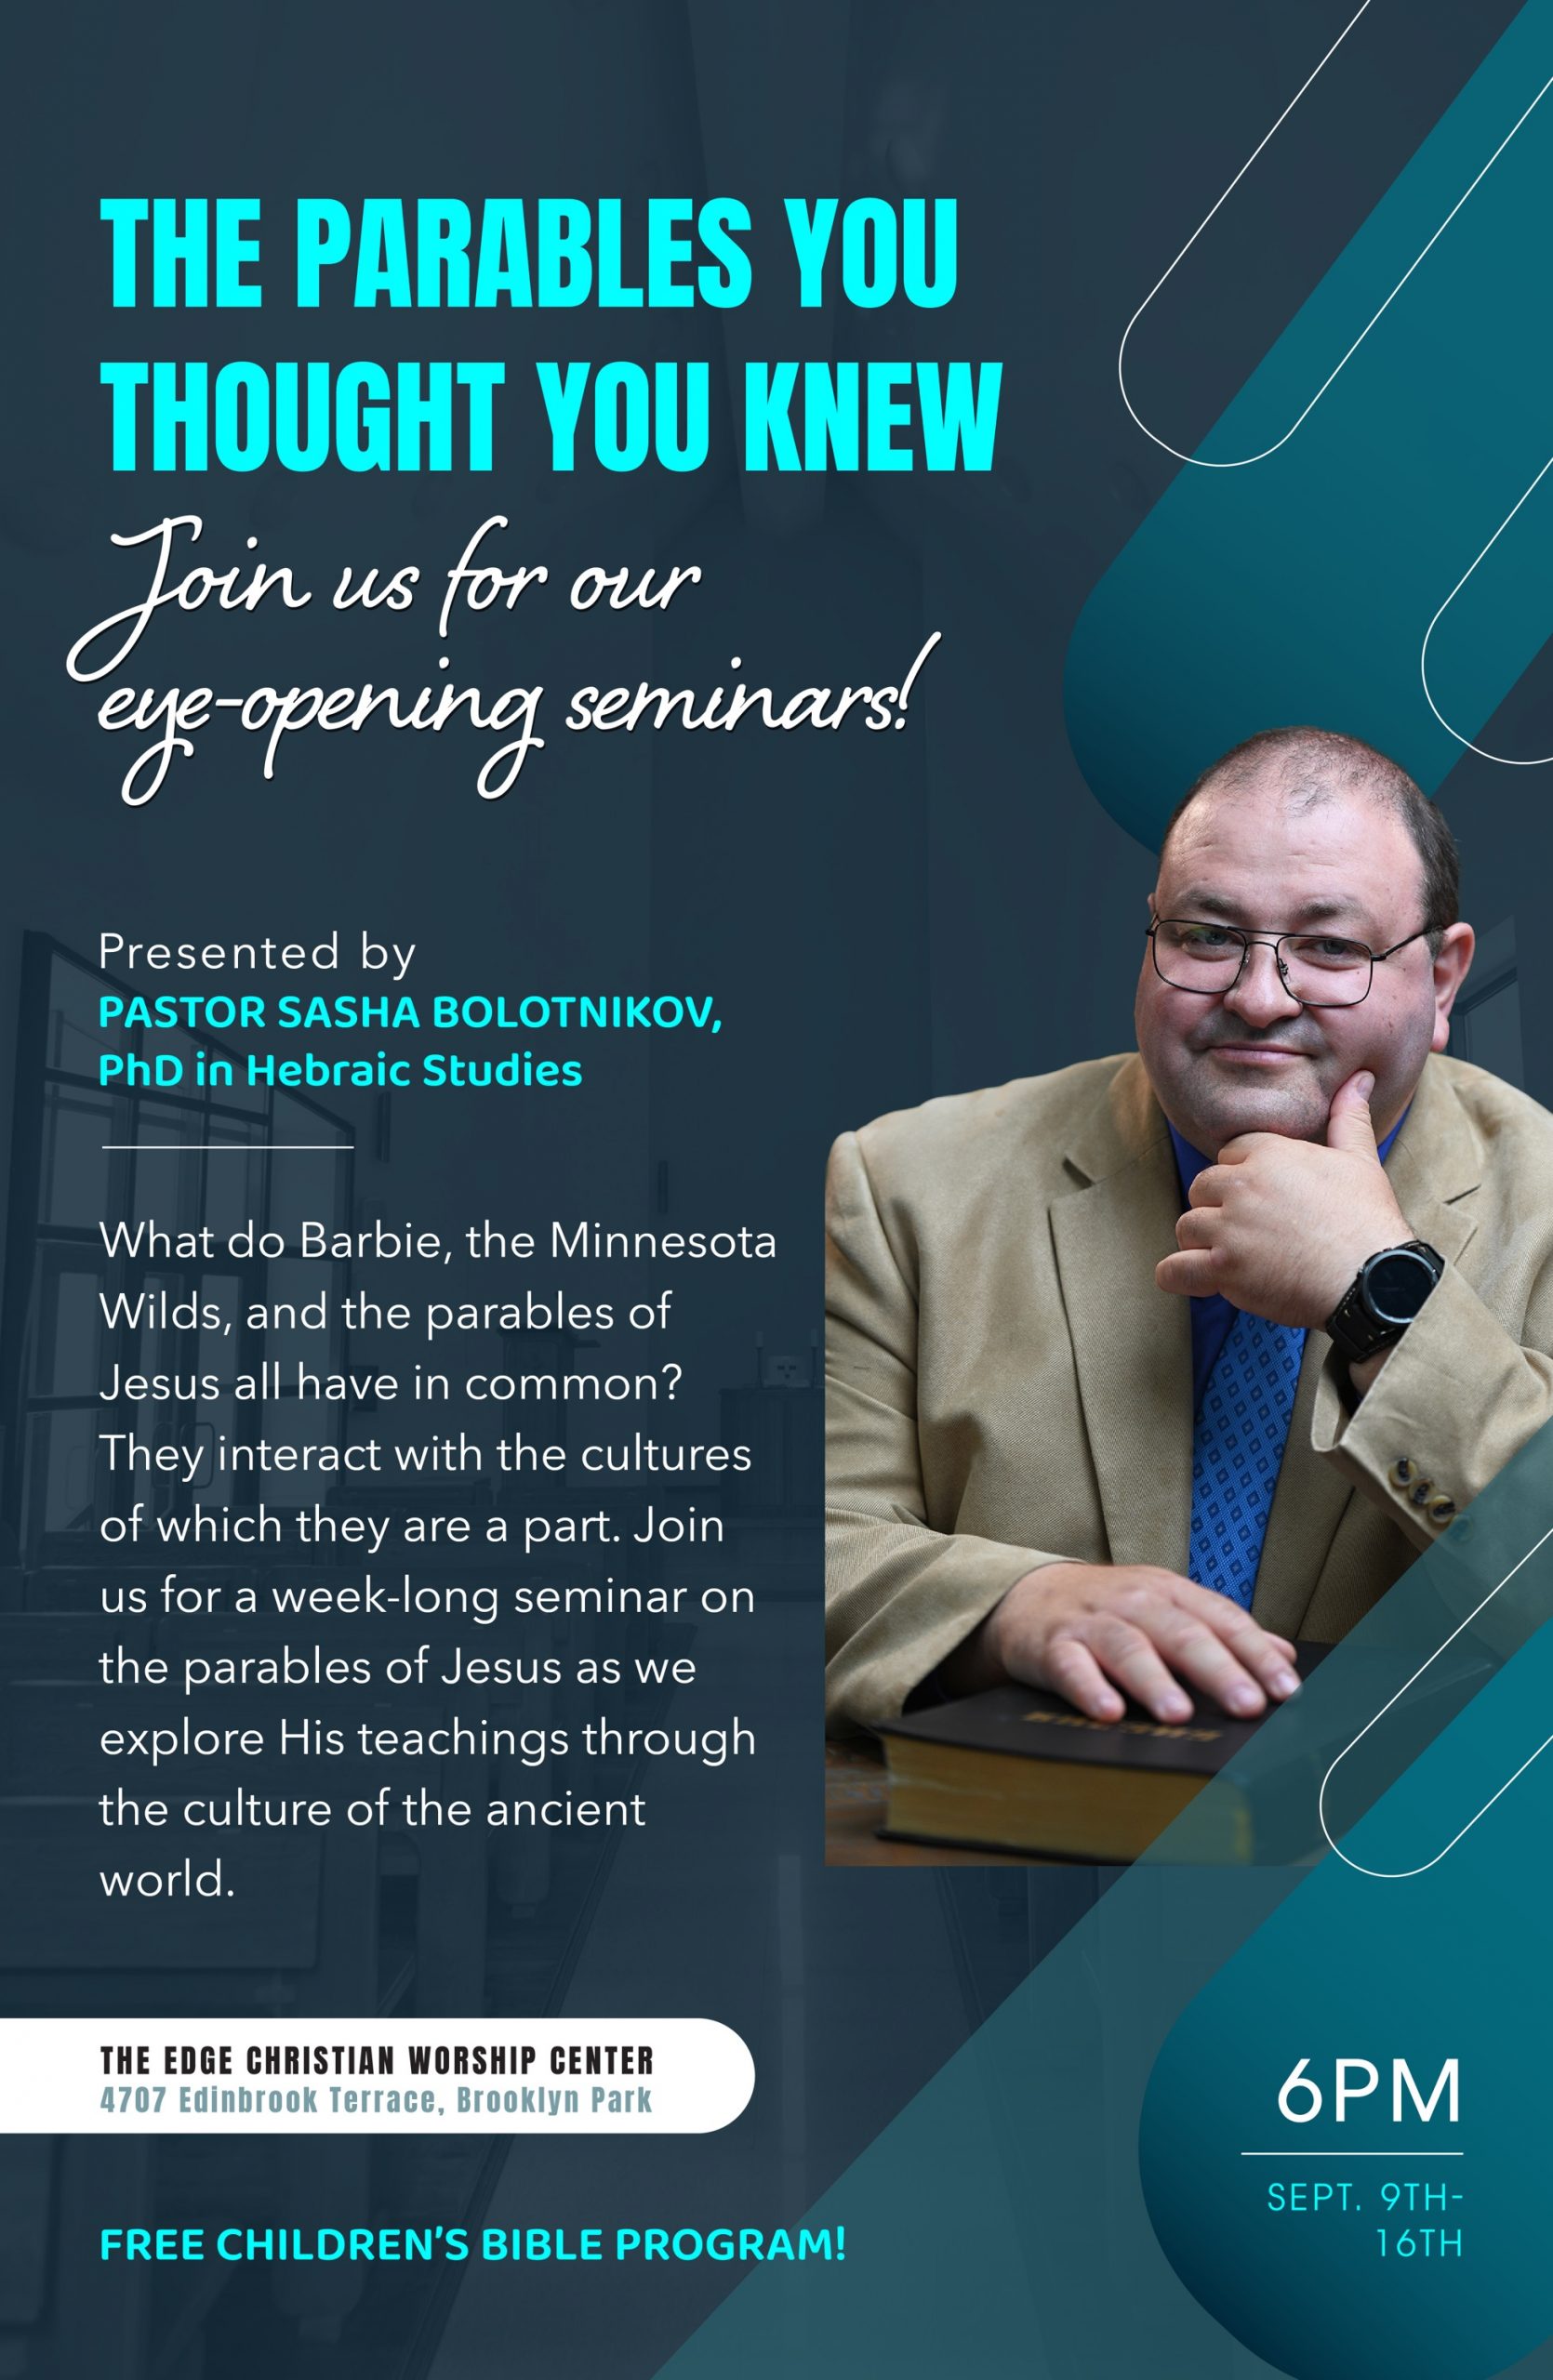 Seminar: “The Parables You Thought You Knew”